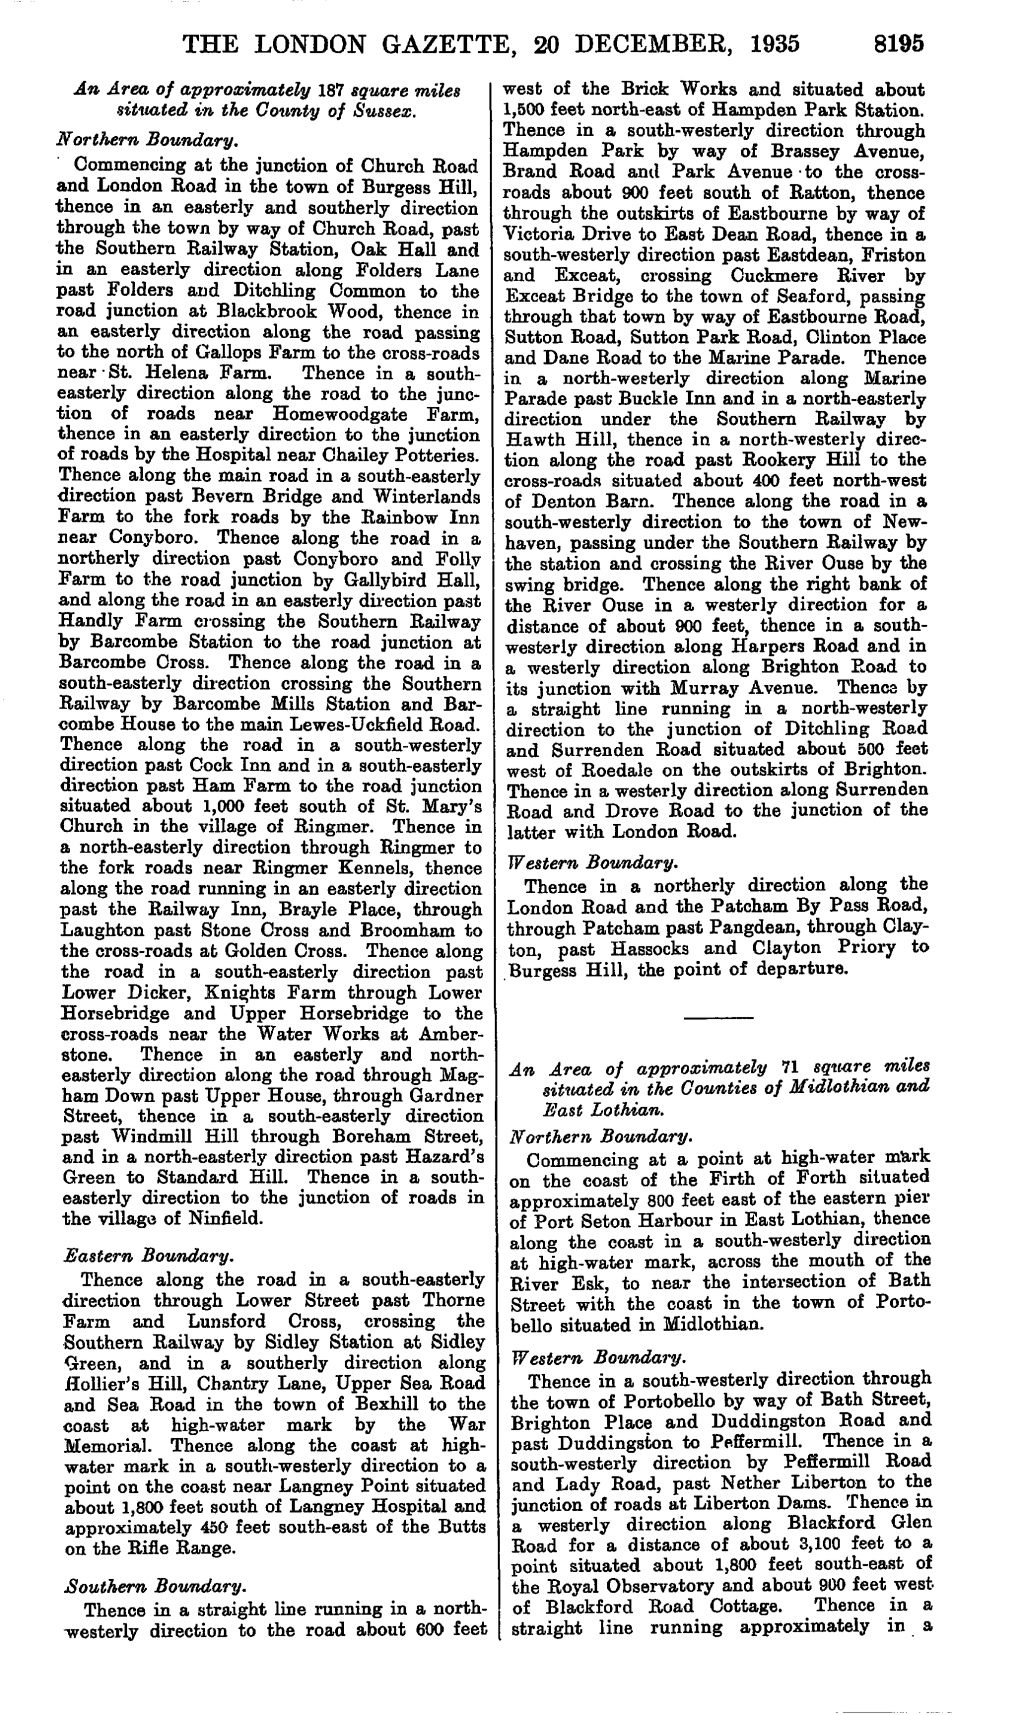 THE LONDON GAZETTE, 20 DECEMBER, 1935 8195 an Area of Approximately 187 Square Miles West of the Brick Works and Situated About Situated in the County of Sussex